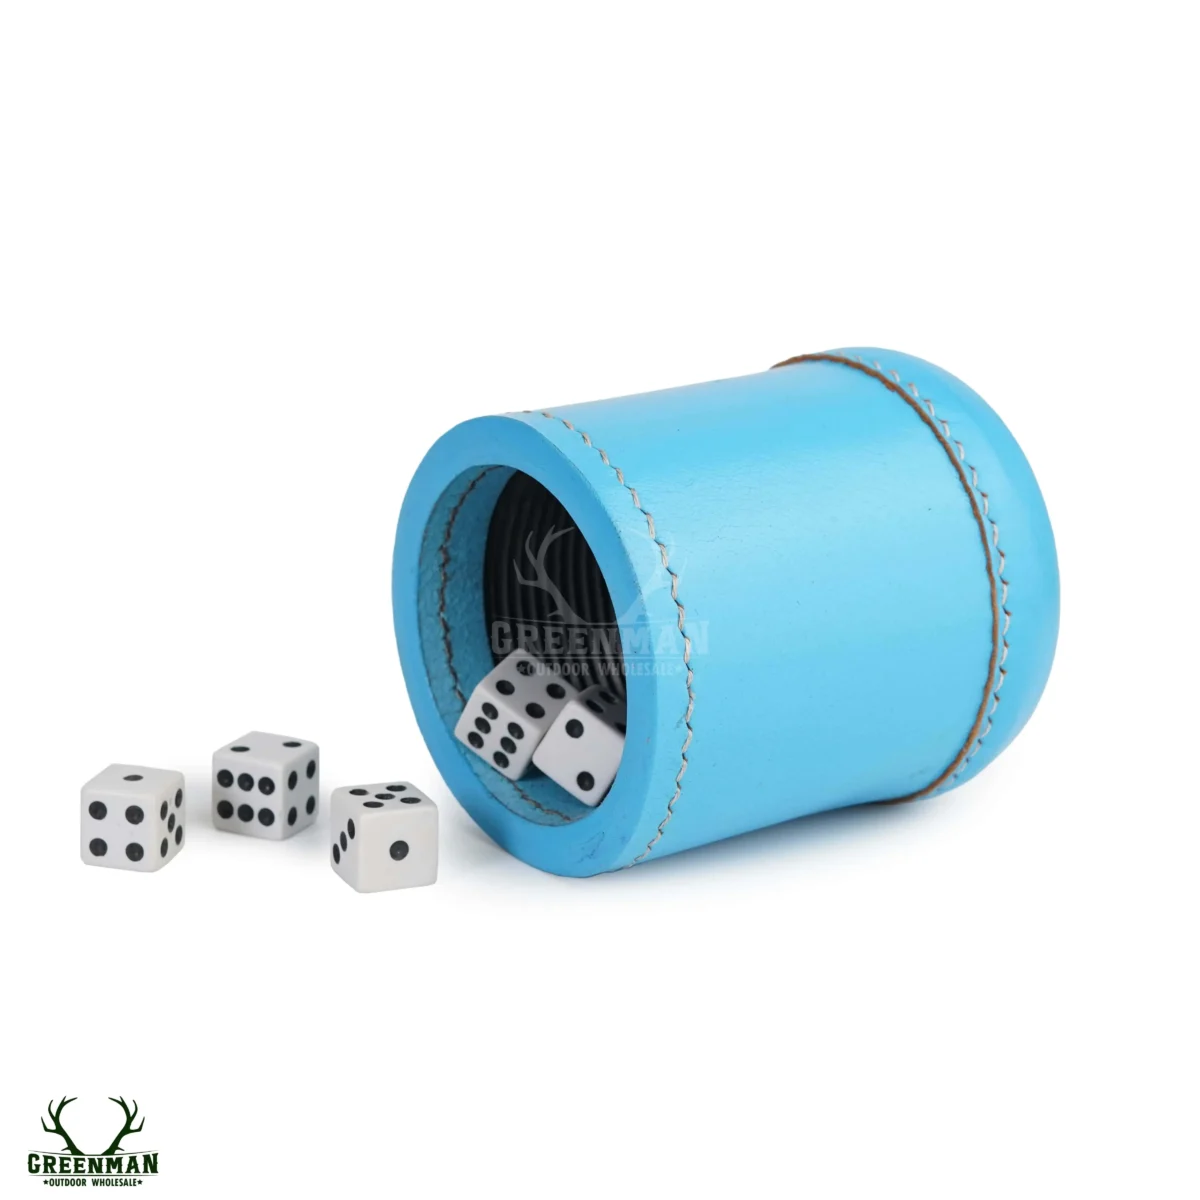 leather dice cup, blue leather dice shaker, ribbed interior leather dice cup quiet while shaking